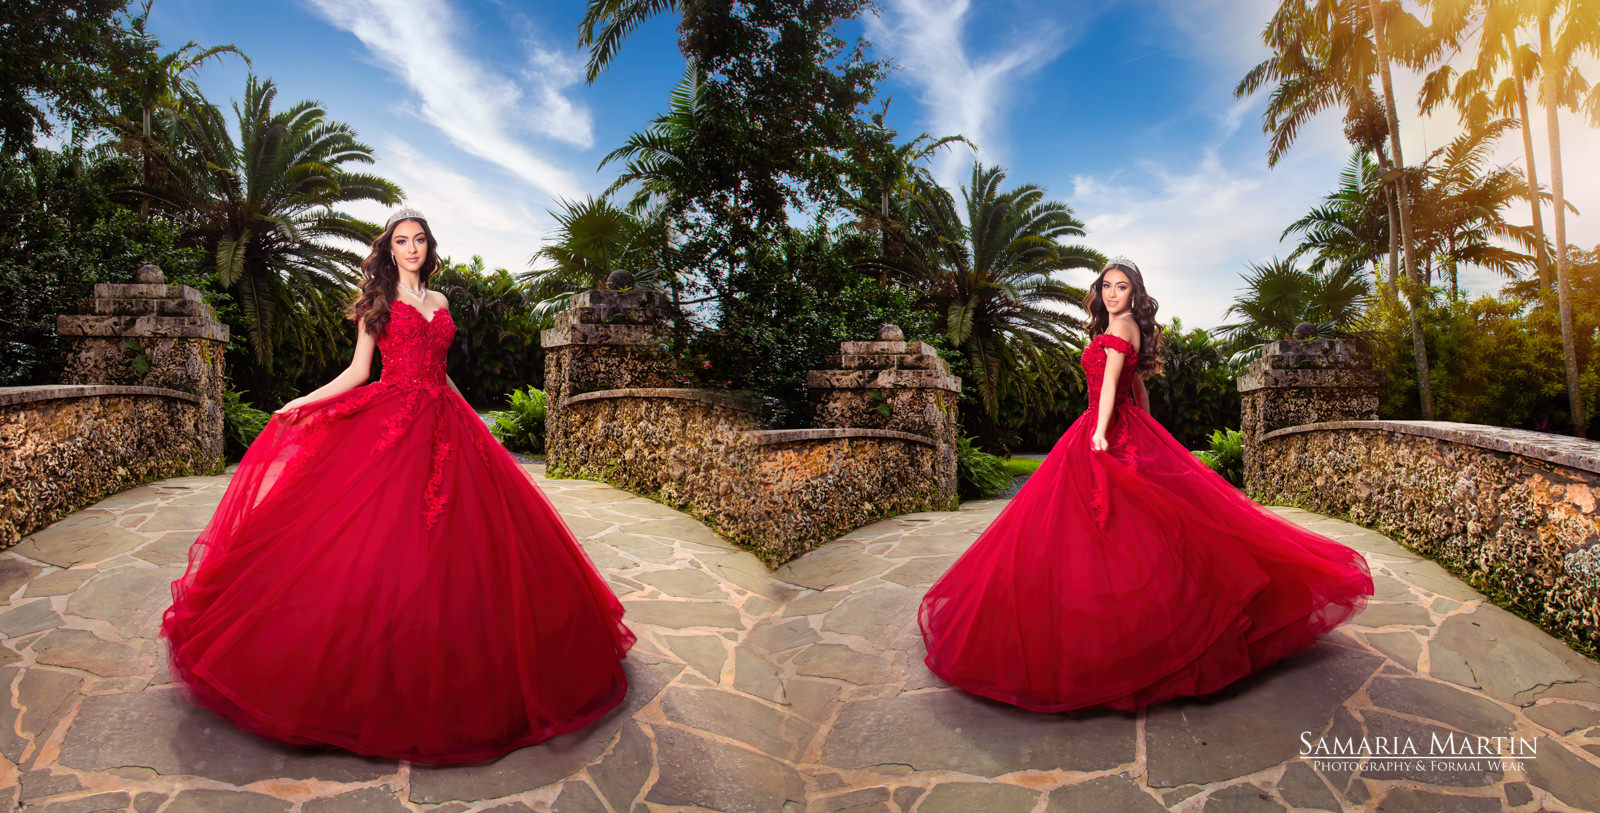 Photos quince in Miami, original quince picture, quince dress boutique, Samaria Martin photographer, gown rental